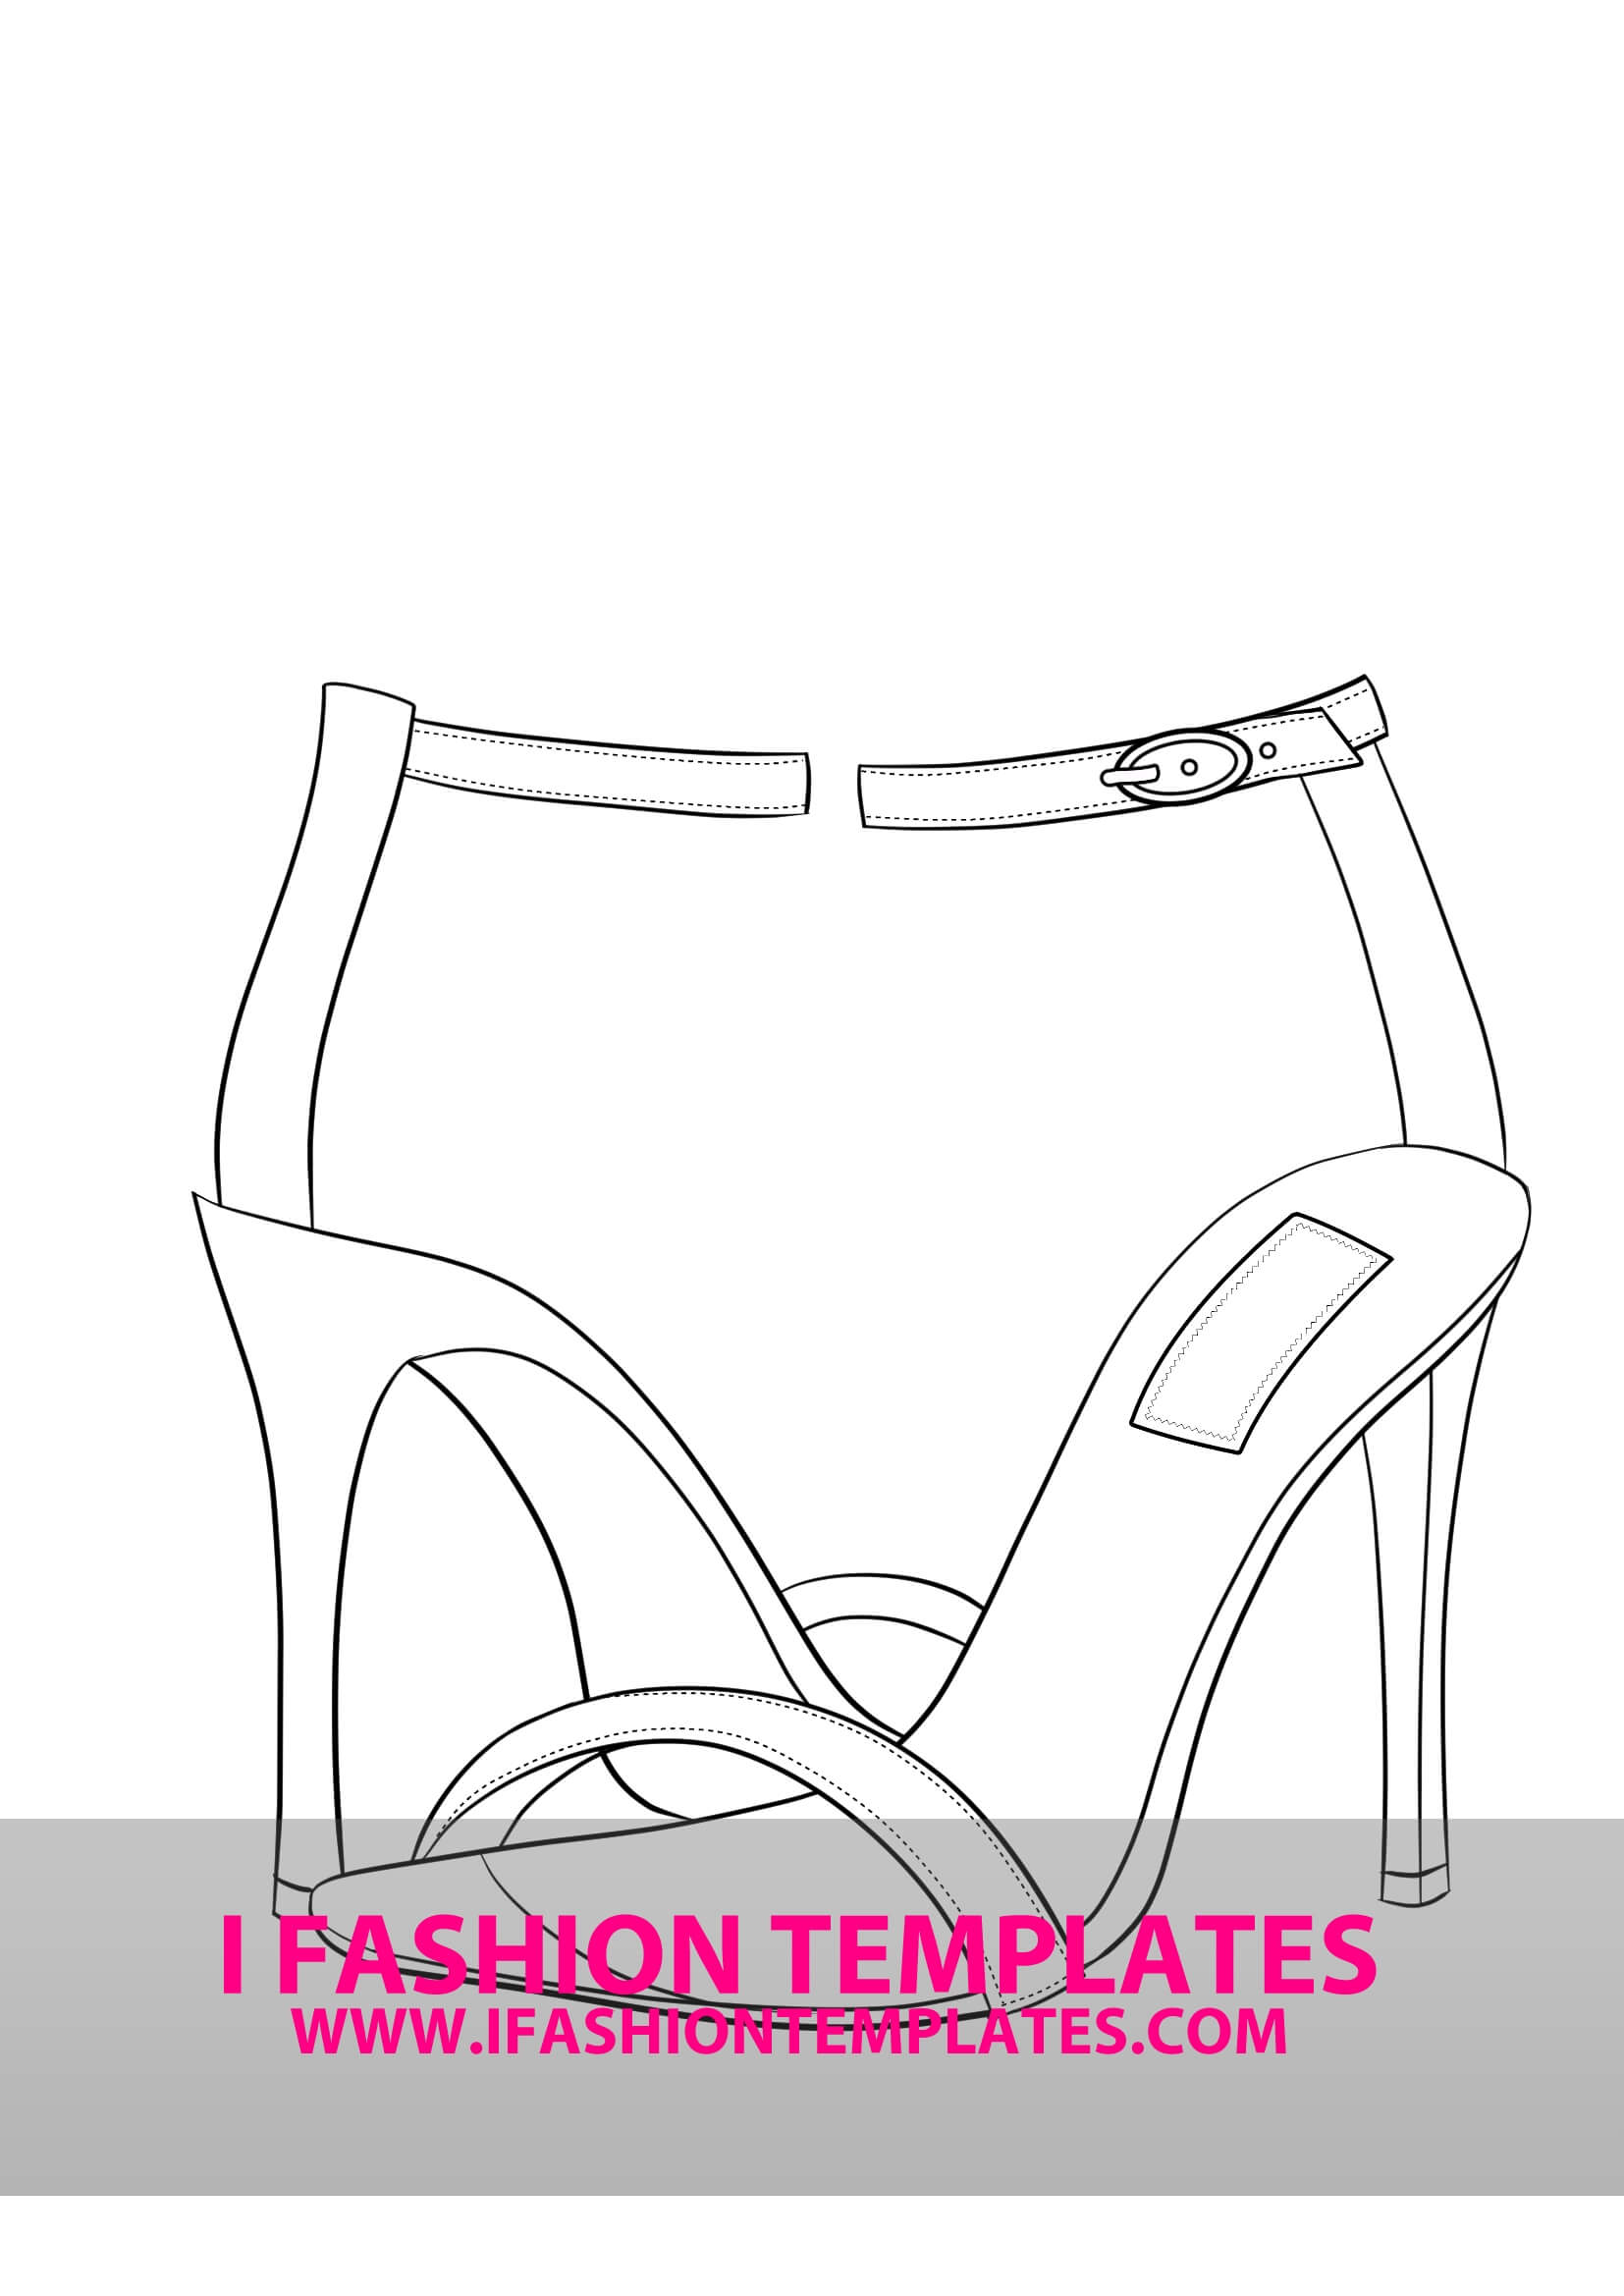 High Heel Drawing Template At Paintingvalley | Explore For High Heel Shoe Template For Card